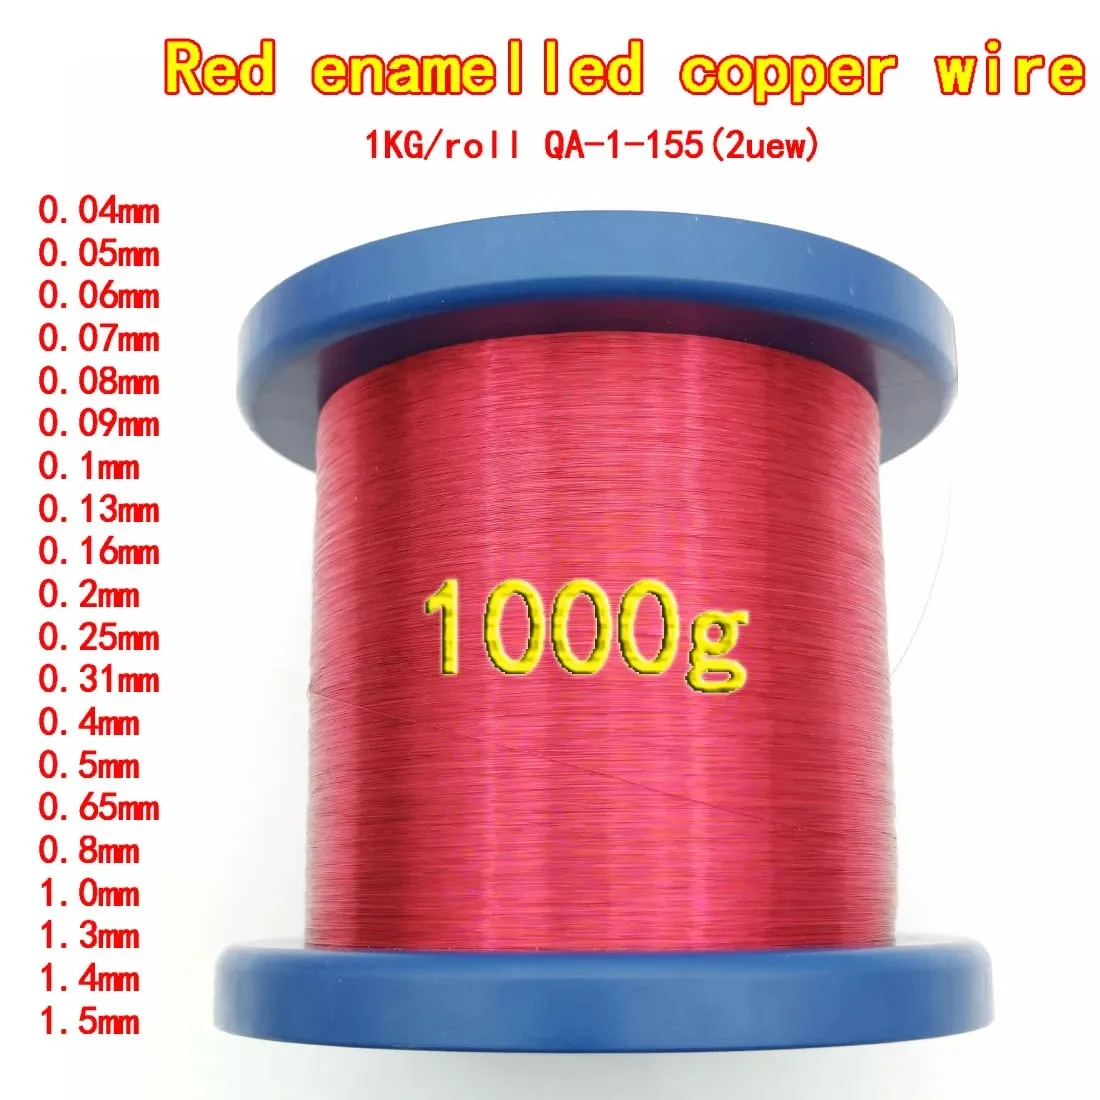 1kg/roll Enameled Copper Wire 0.05mm 0.08mm 0.2mm 1.5mm Magnet Wire Magnetic Coil Winding For Electromagnet Motor inductance DIY